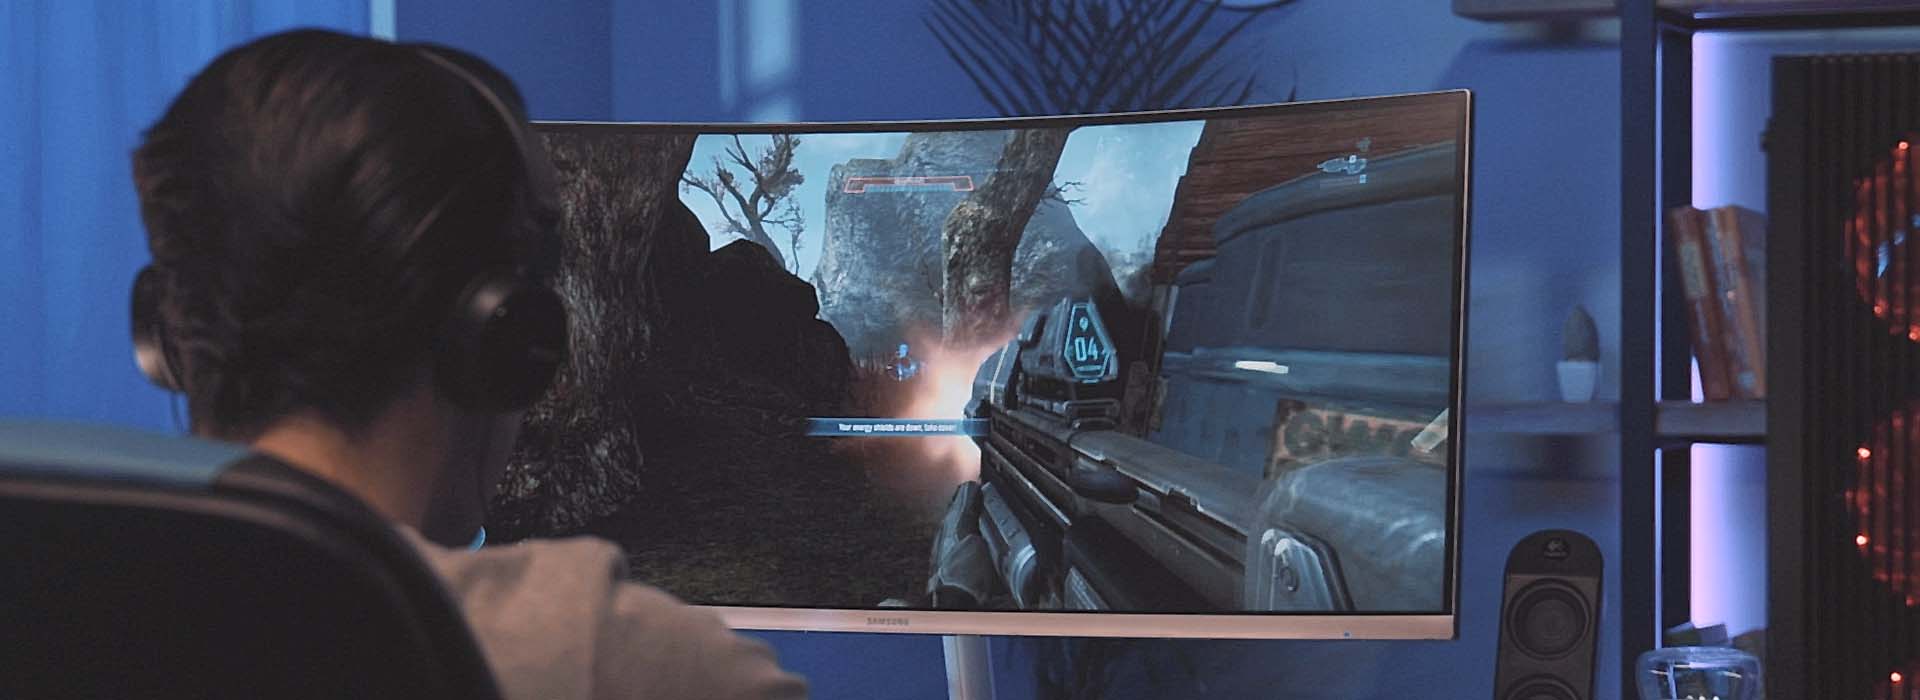 A man is seated in front of a Samsung gaming monitor playing a shooter game.